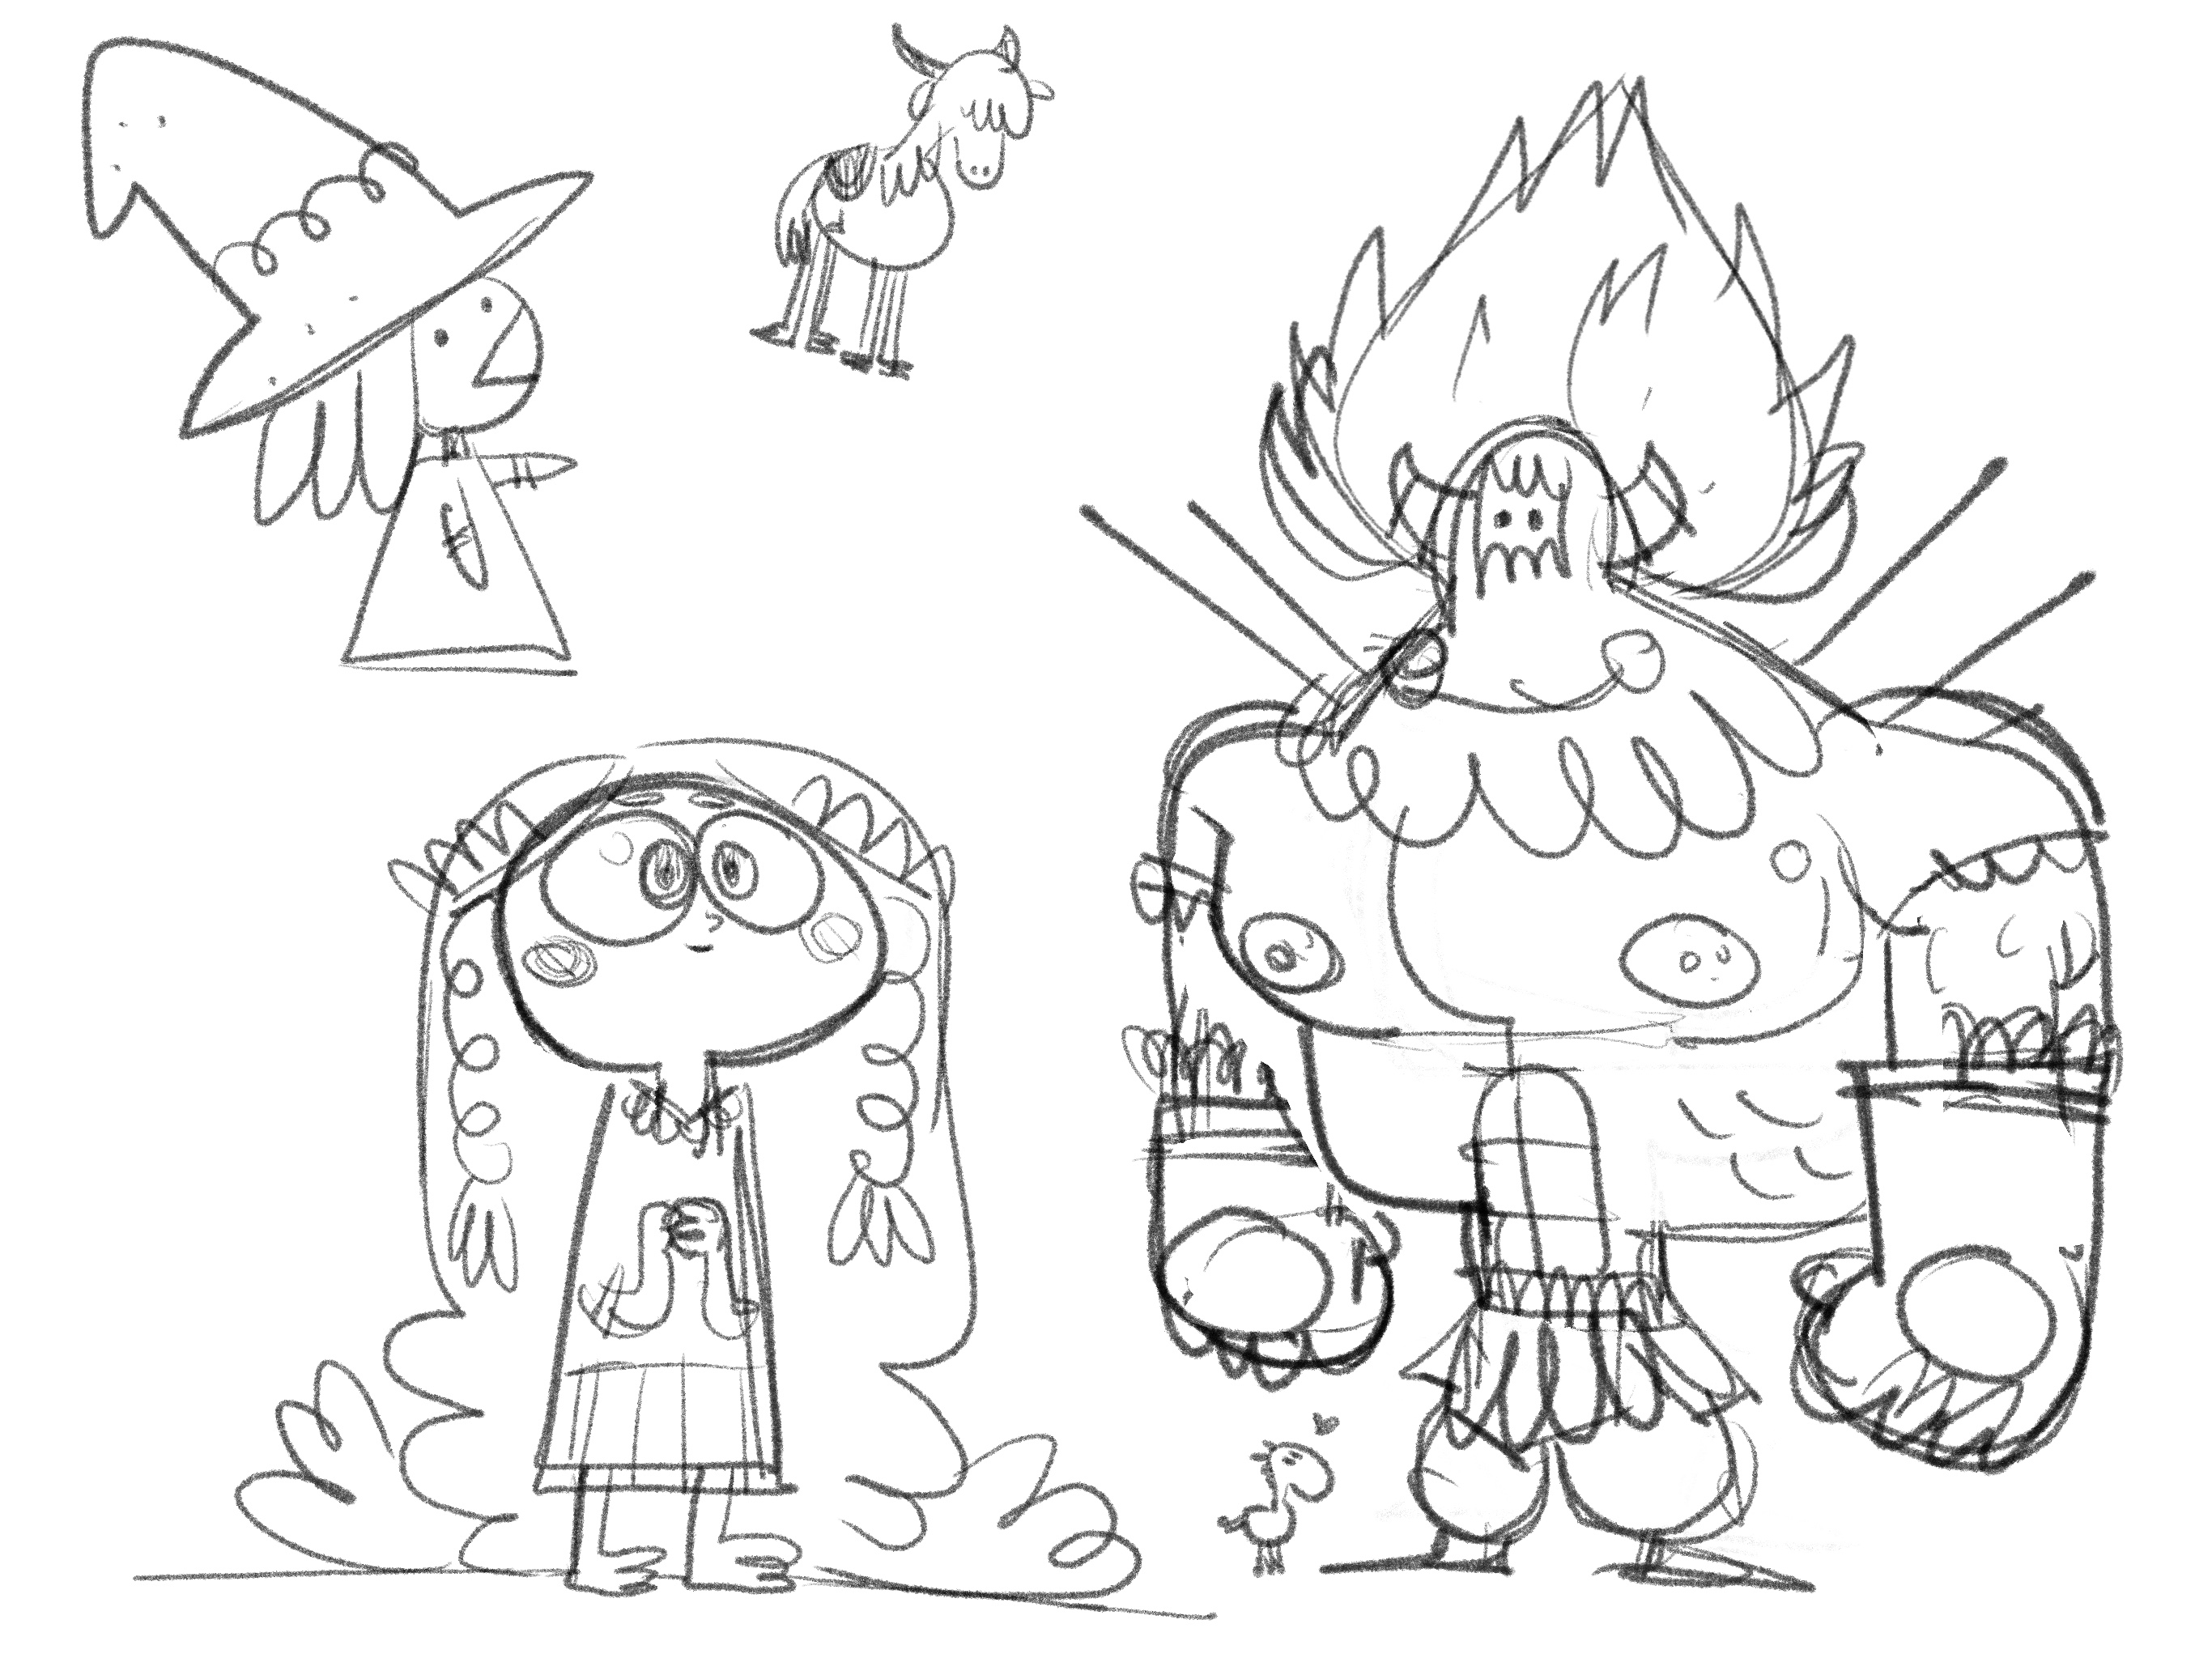 Sketches of characters from Elden Ring Shadow of the Erdtree in a cartoony style